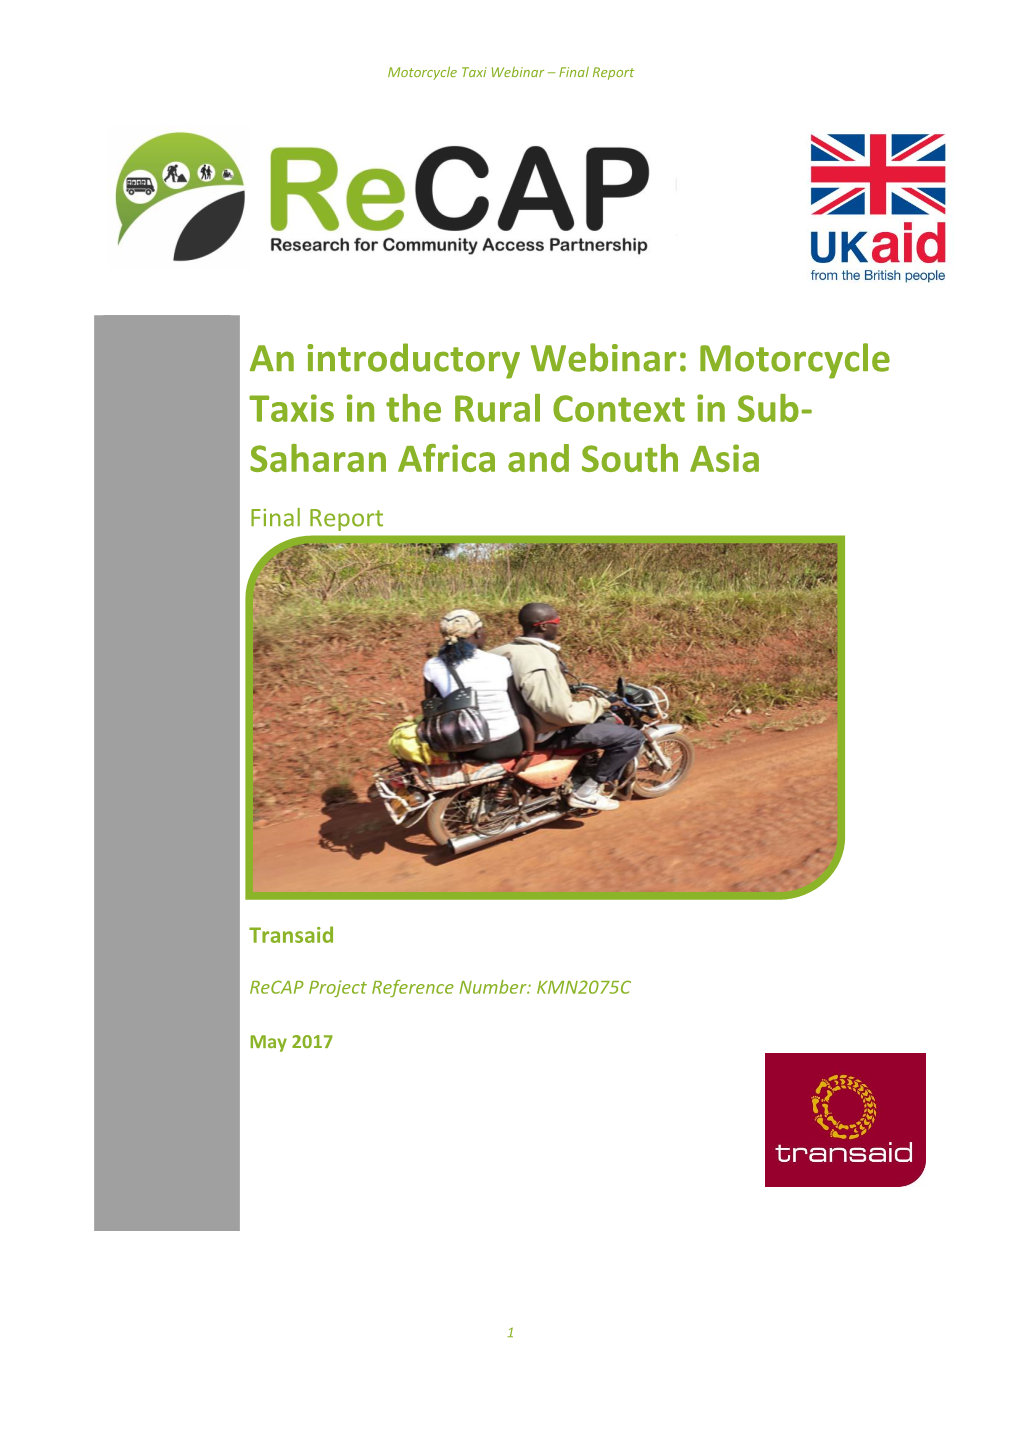 Motorcycle Taxis in the Rural Context in Sub- Saharan Africa and South Asia Final Report